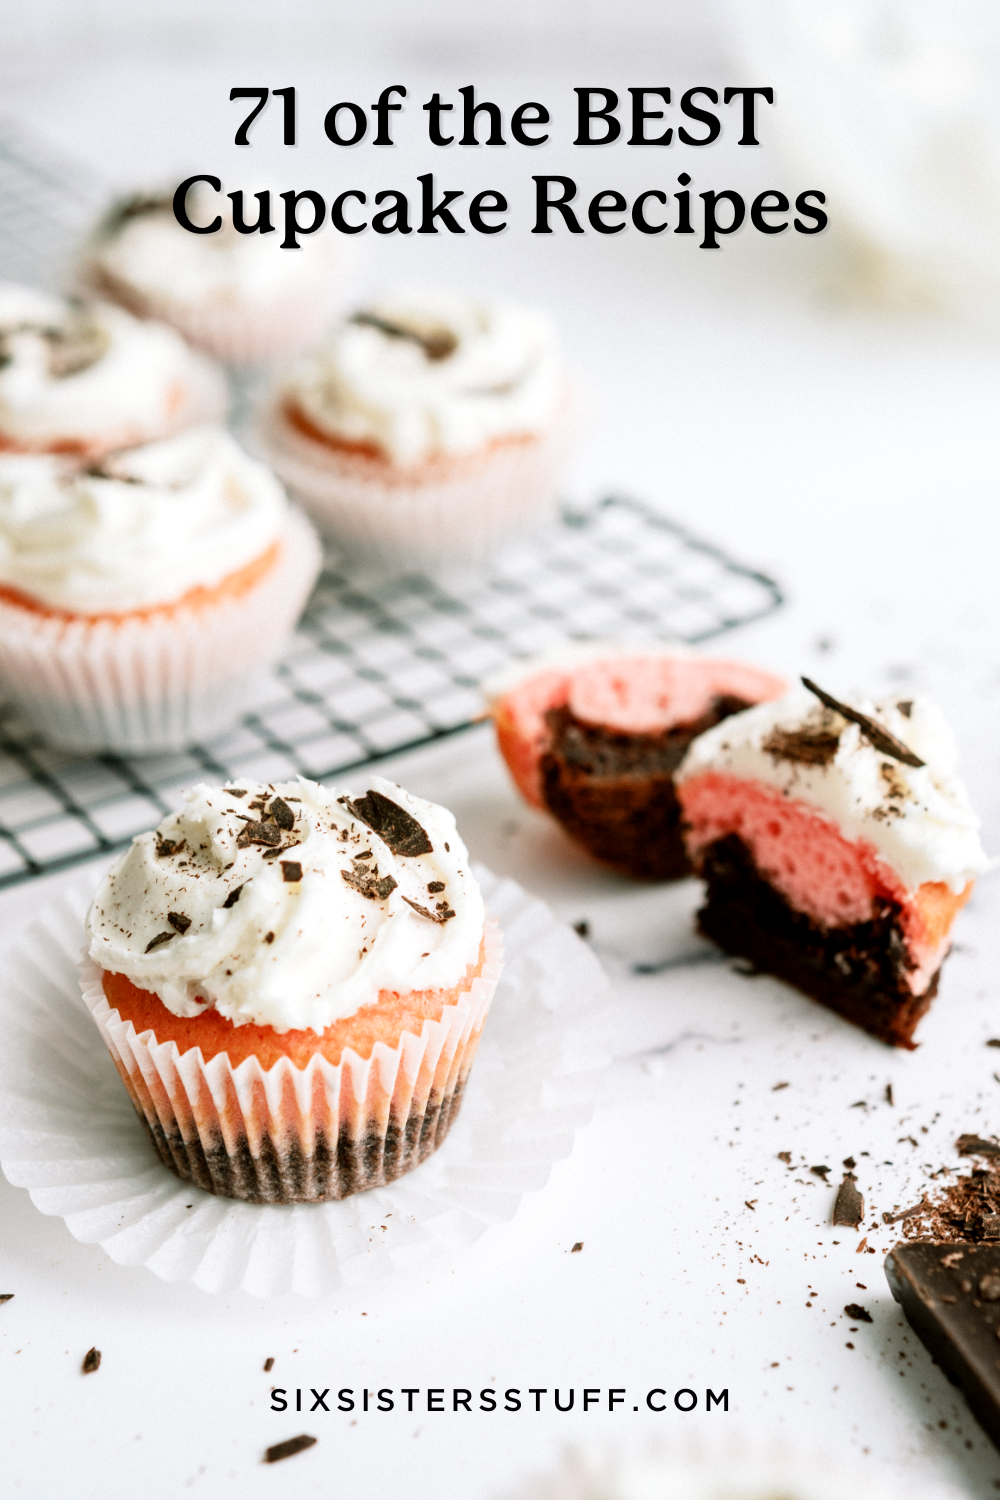 71 of the BEST Cupcake Recipes